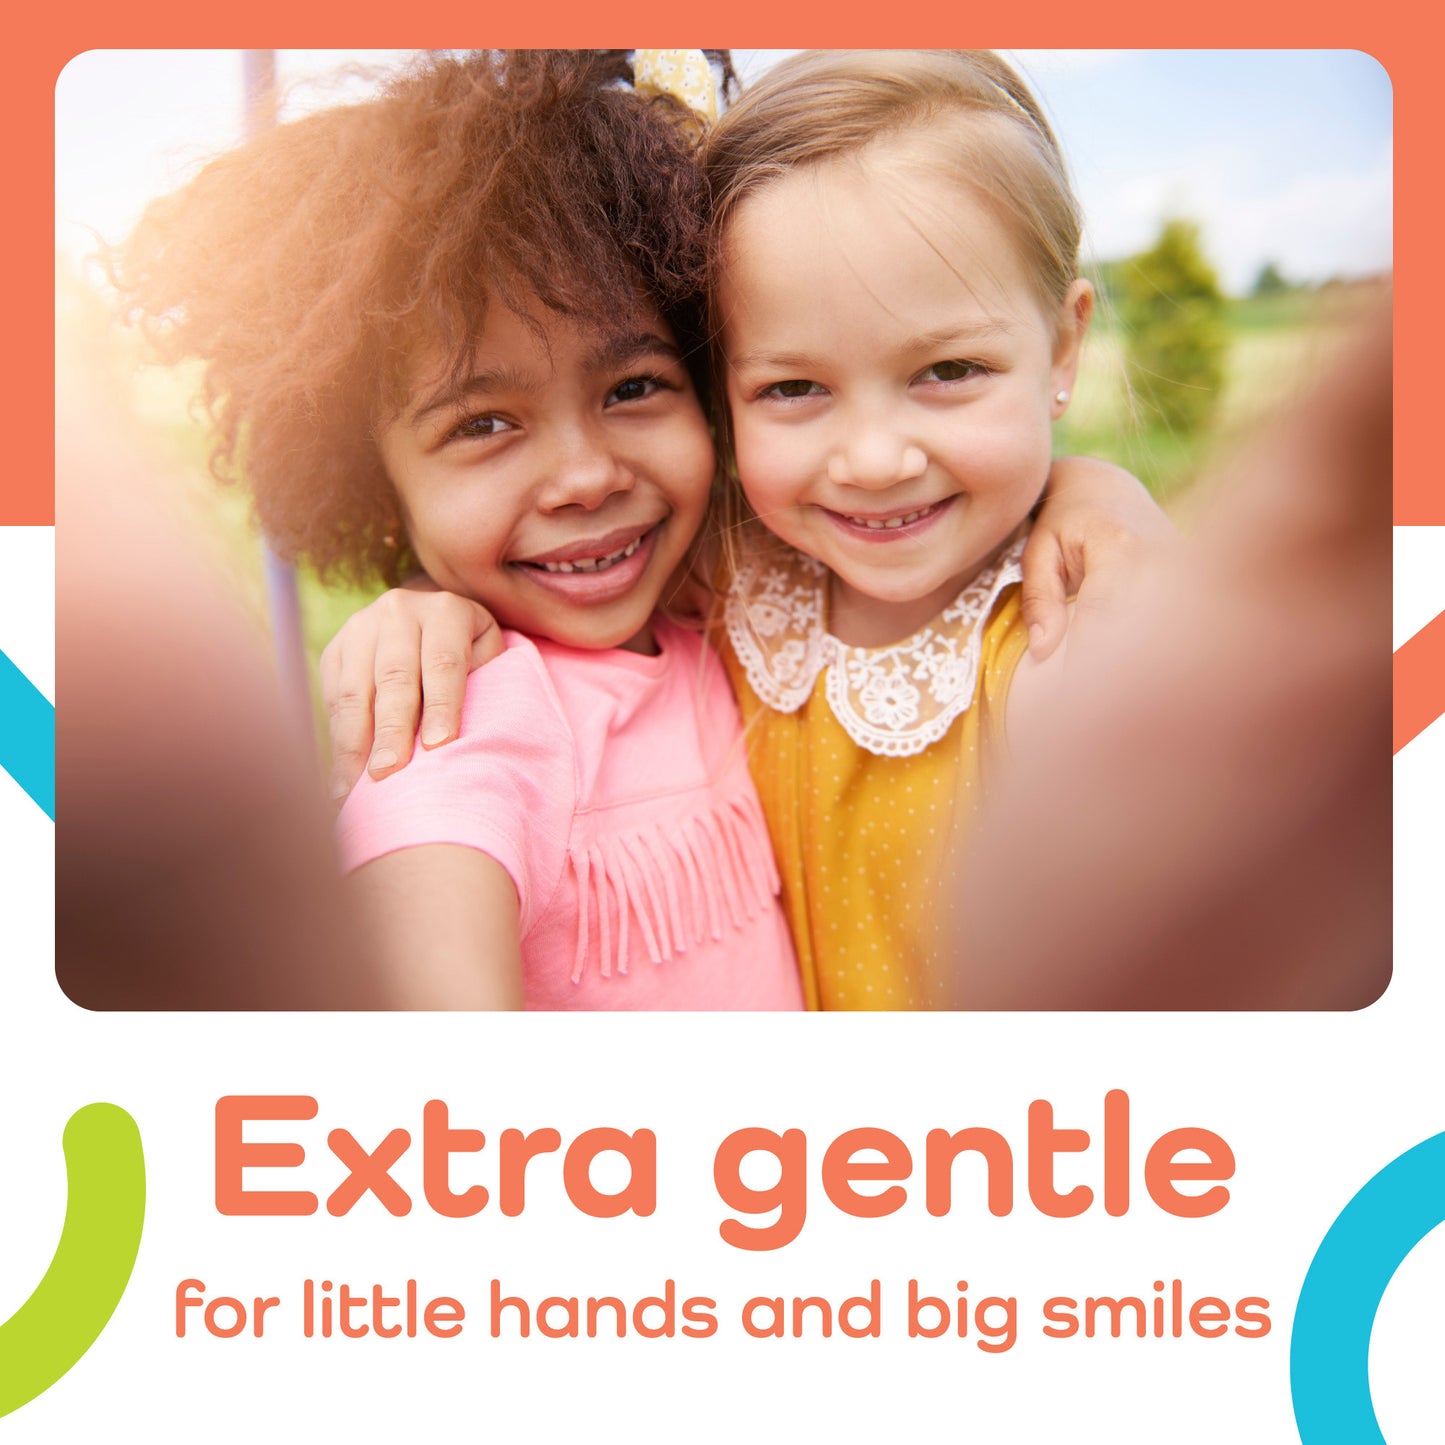 Extra gentle for little hands and big smiles